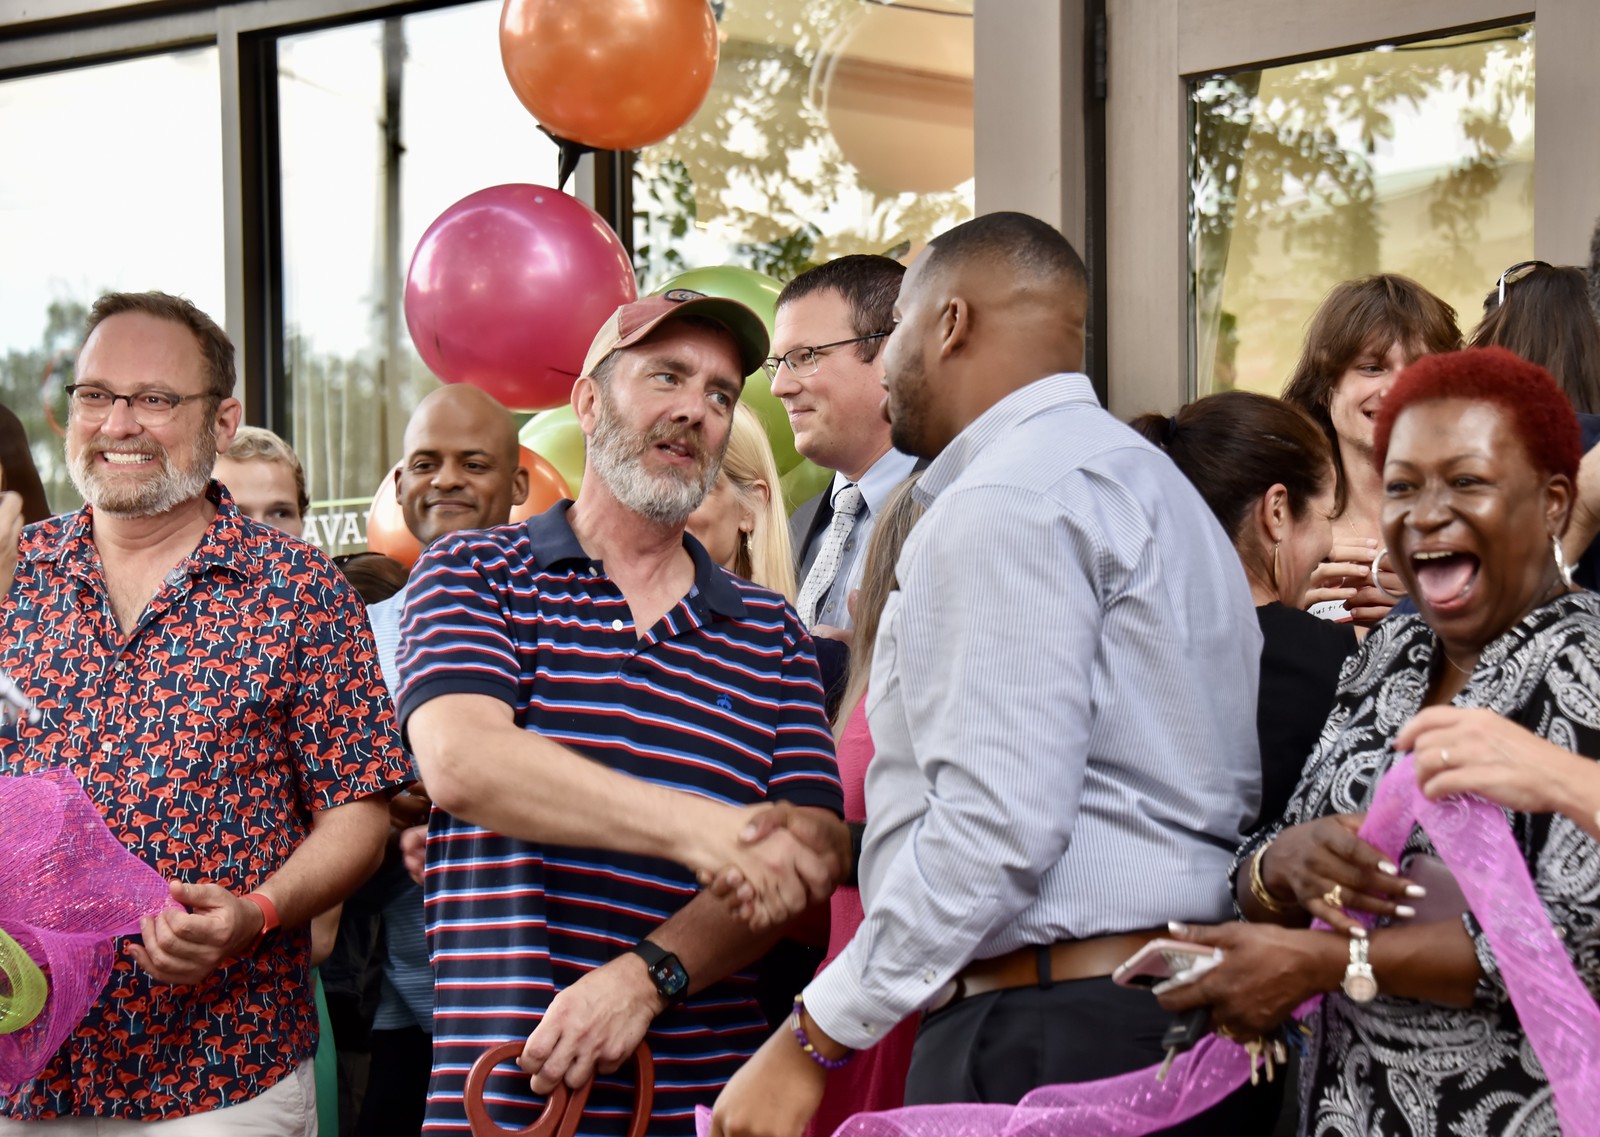 Savannah Square Pops 6 Year Anniversary and Ribbon Cutting for New Location